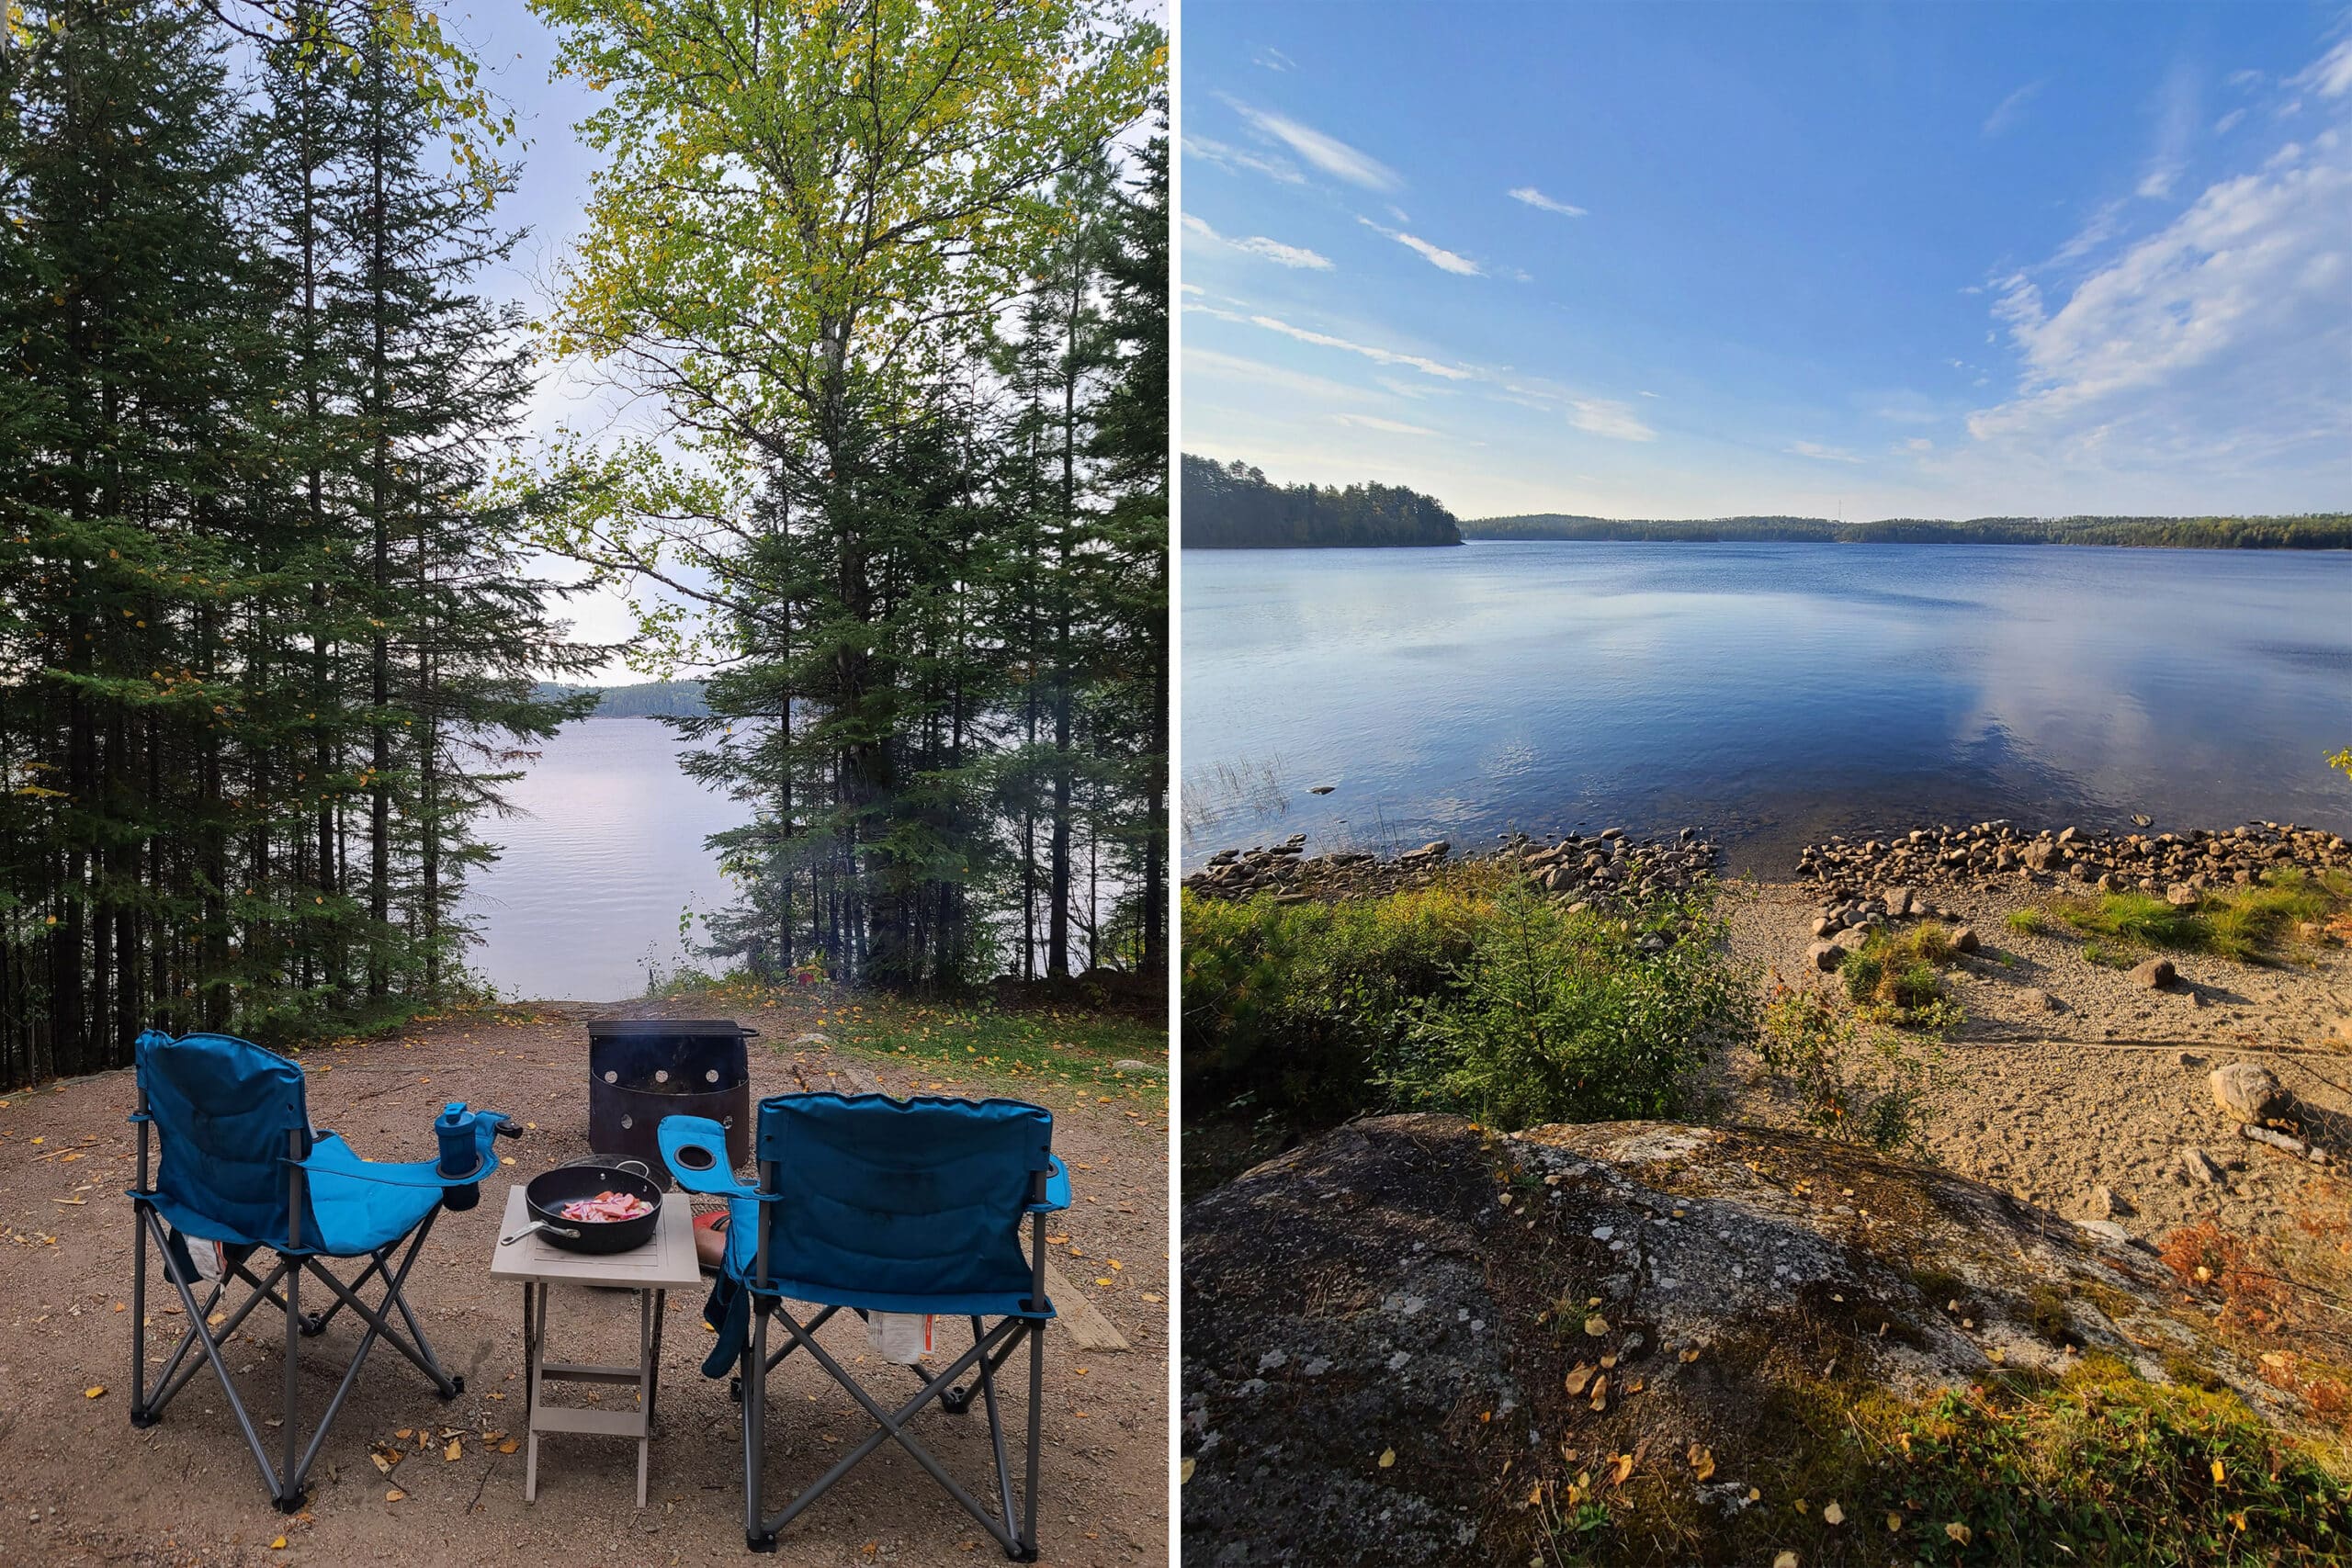 A 2 part image showing a view out over a lake, both with campground in the foreground, and from at the edge of the water.